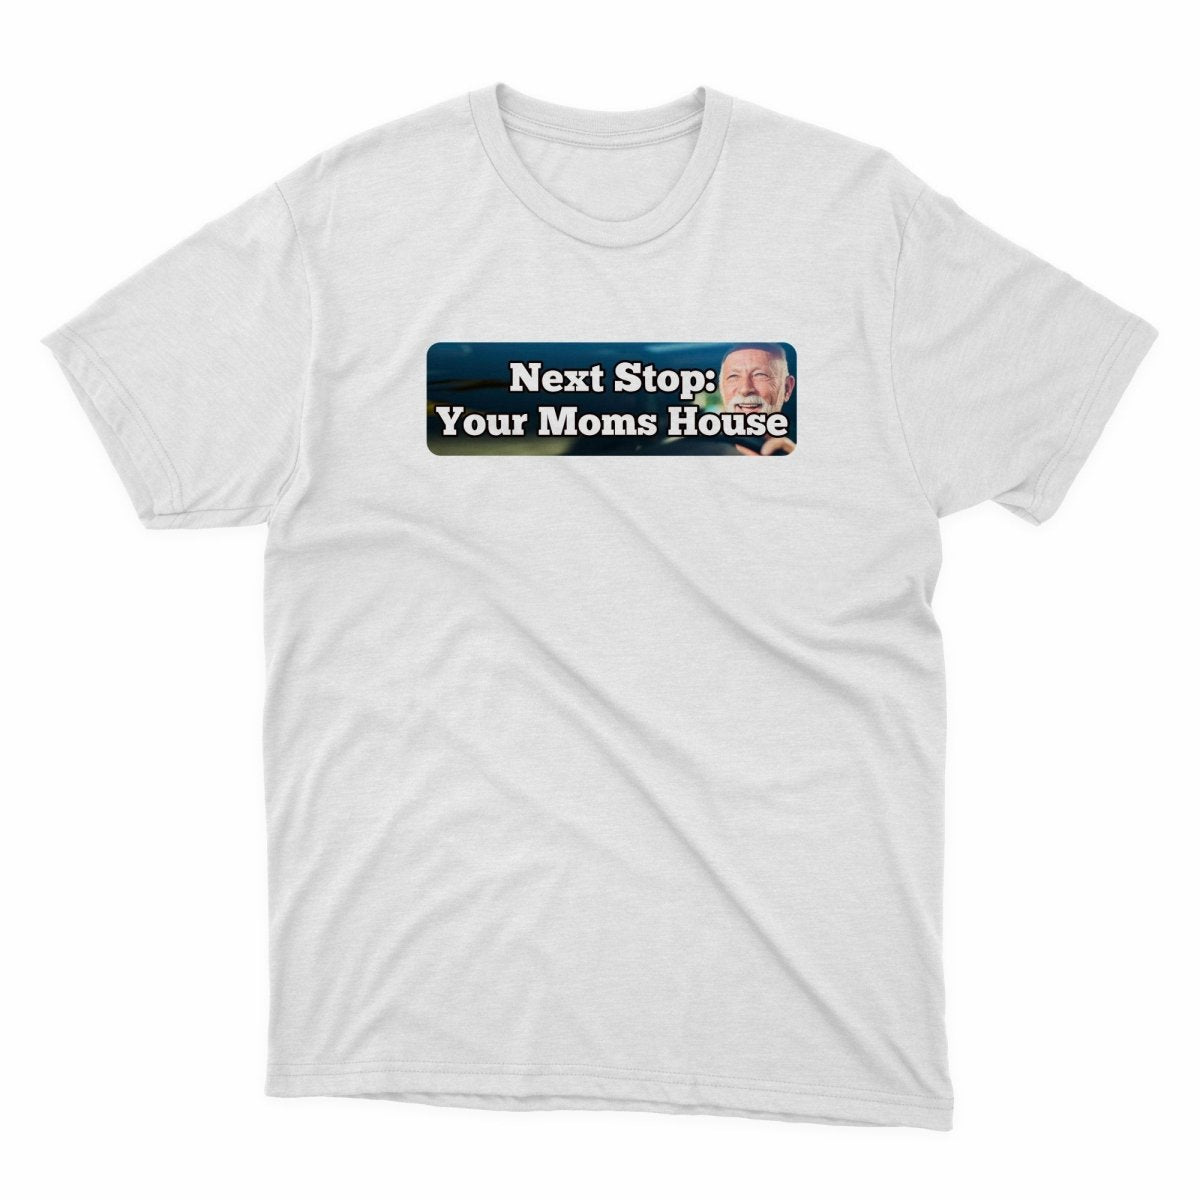 Next Stop Your Moms House Shirt - stickerbullNext Stop Your Moms House ShirtShirtsPrintifystickerbull55703030490655335342WhiteSa white t - shirt with the text next stop your moms house